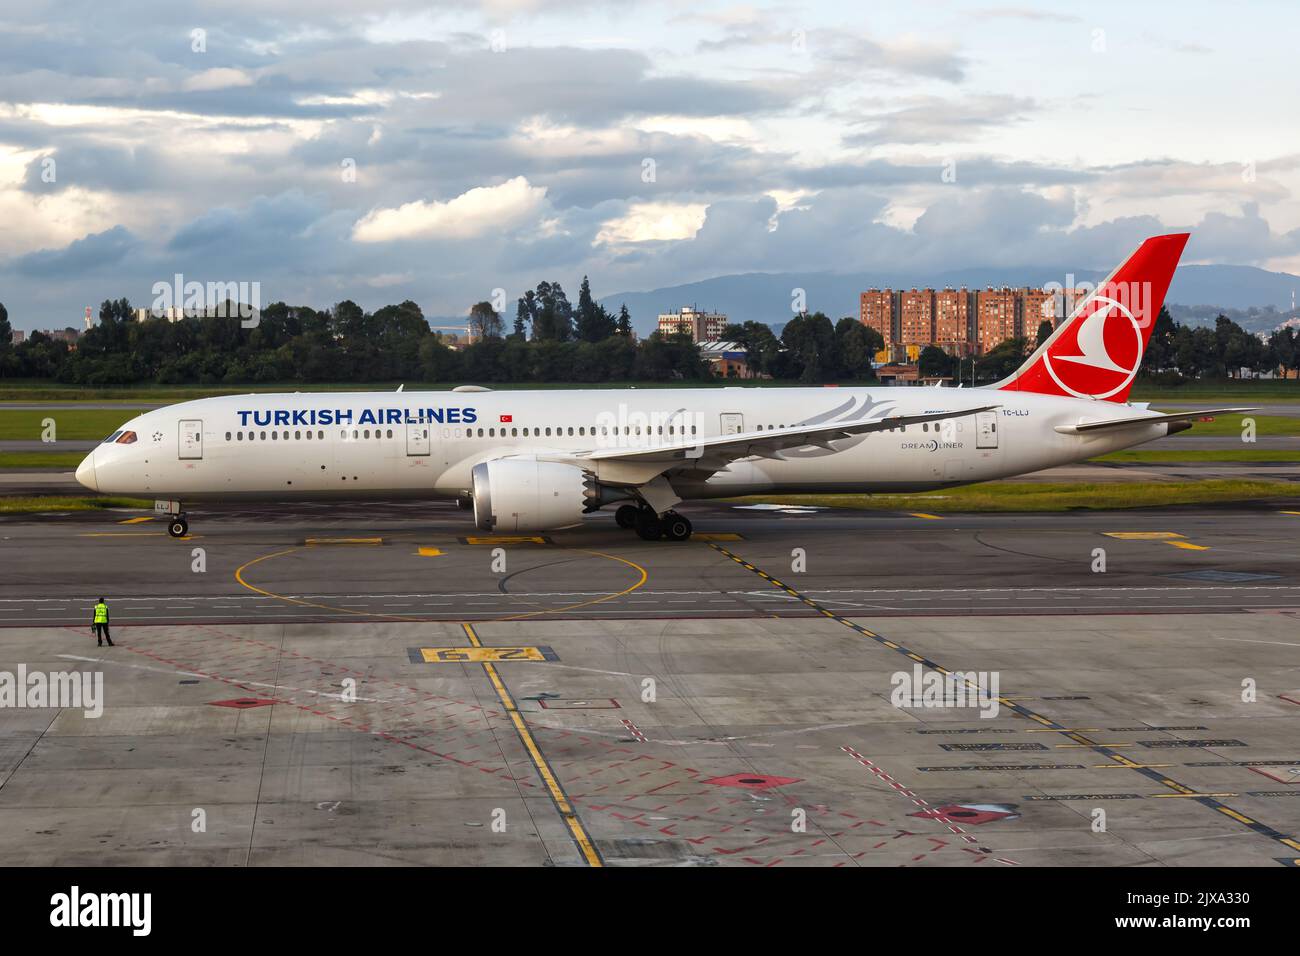 Bogota, Colombia - April 20, 2022: Turkish Airlines Boeing 787-9 Dreamliner airplane at Bogota airport (BOG) in Colombia. Stock Photo